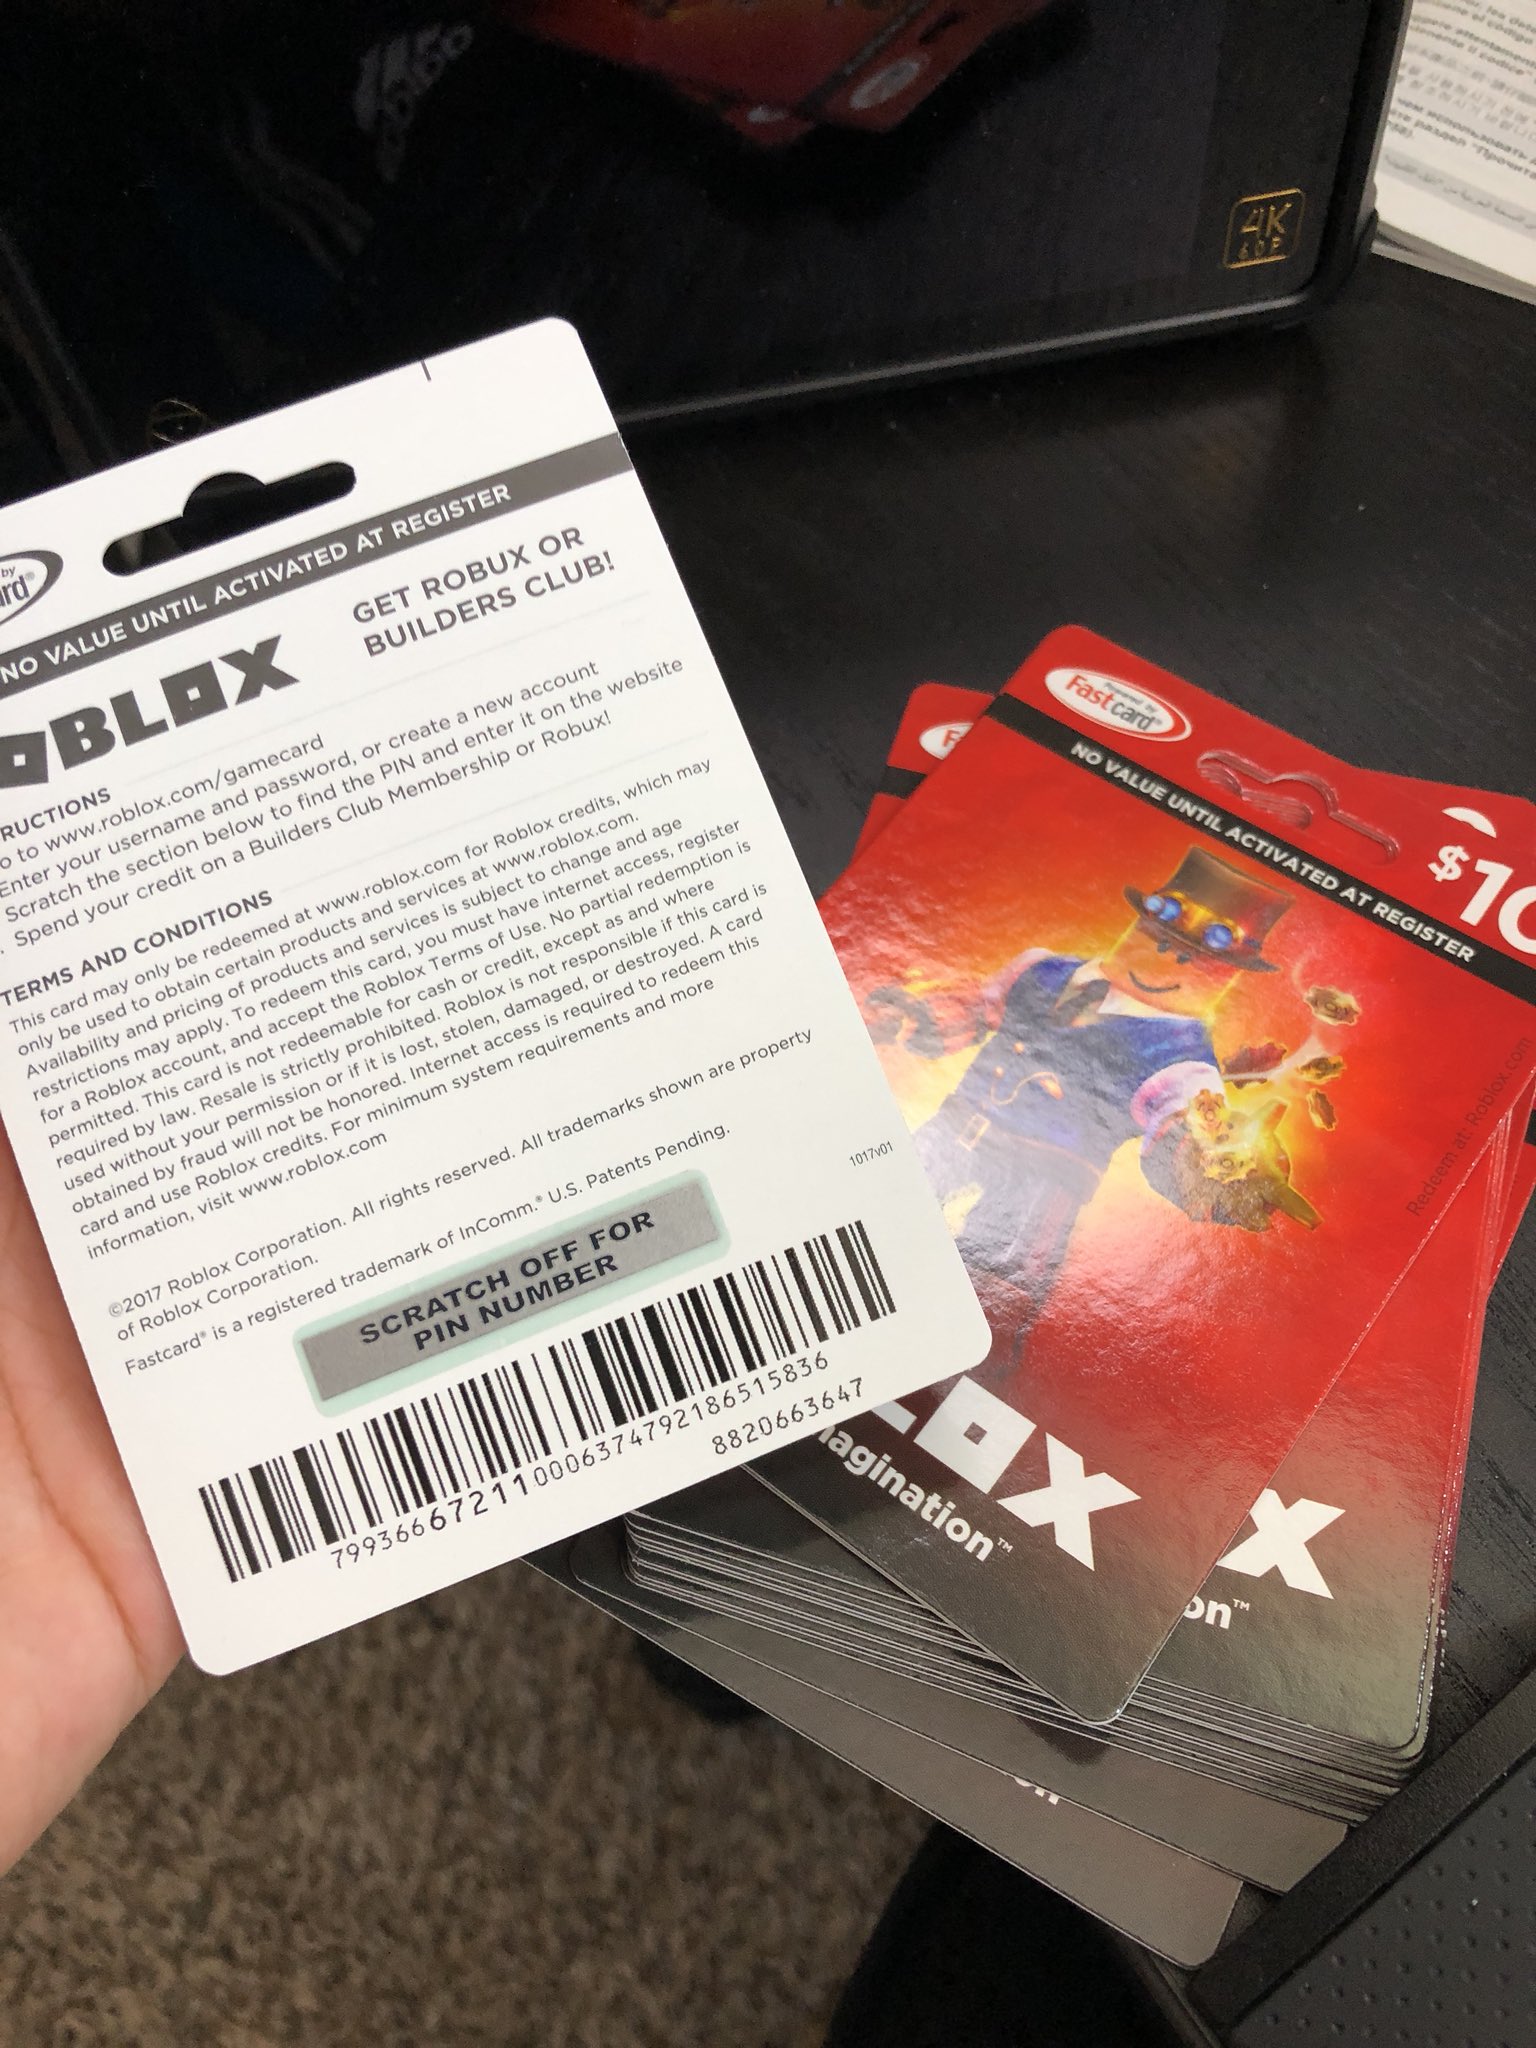 Dylan On Twitter I Found A Bunch Of Robux Gift Cards I Bought A While Ago Who Wants A Code